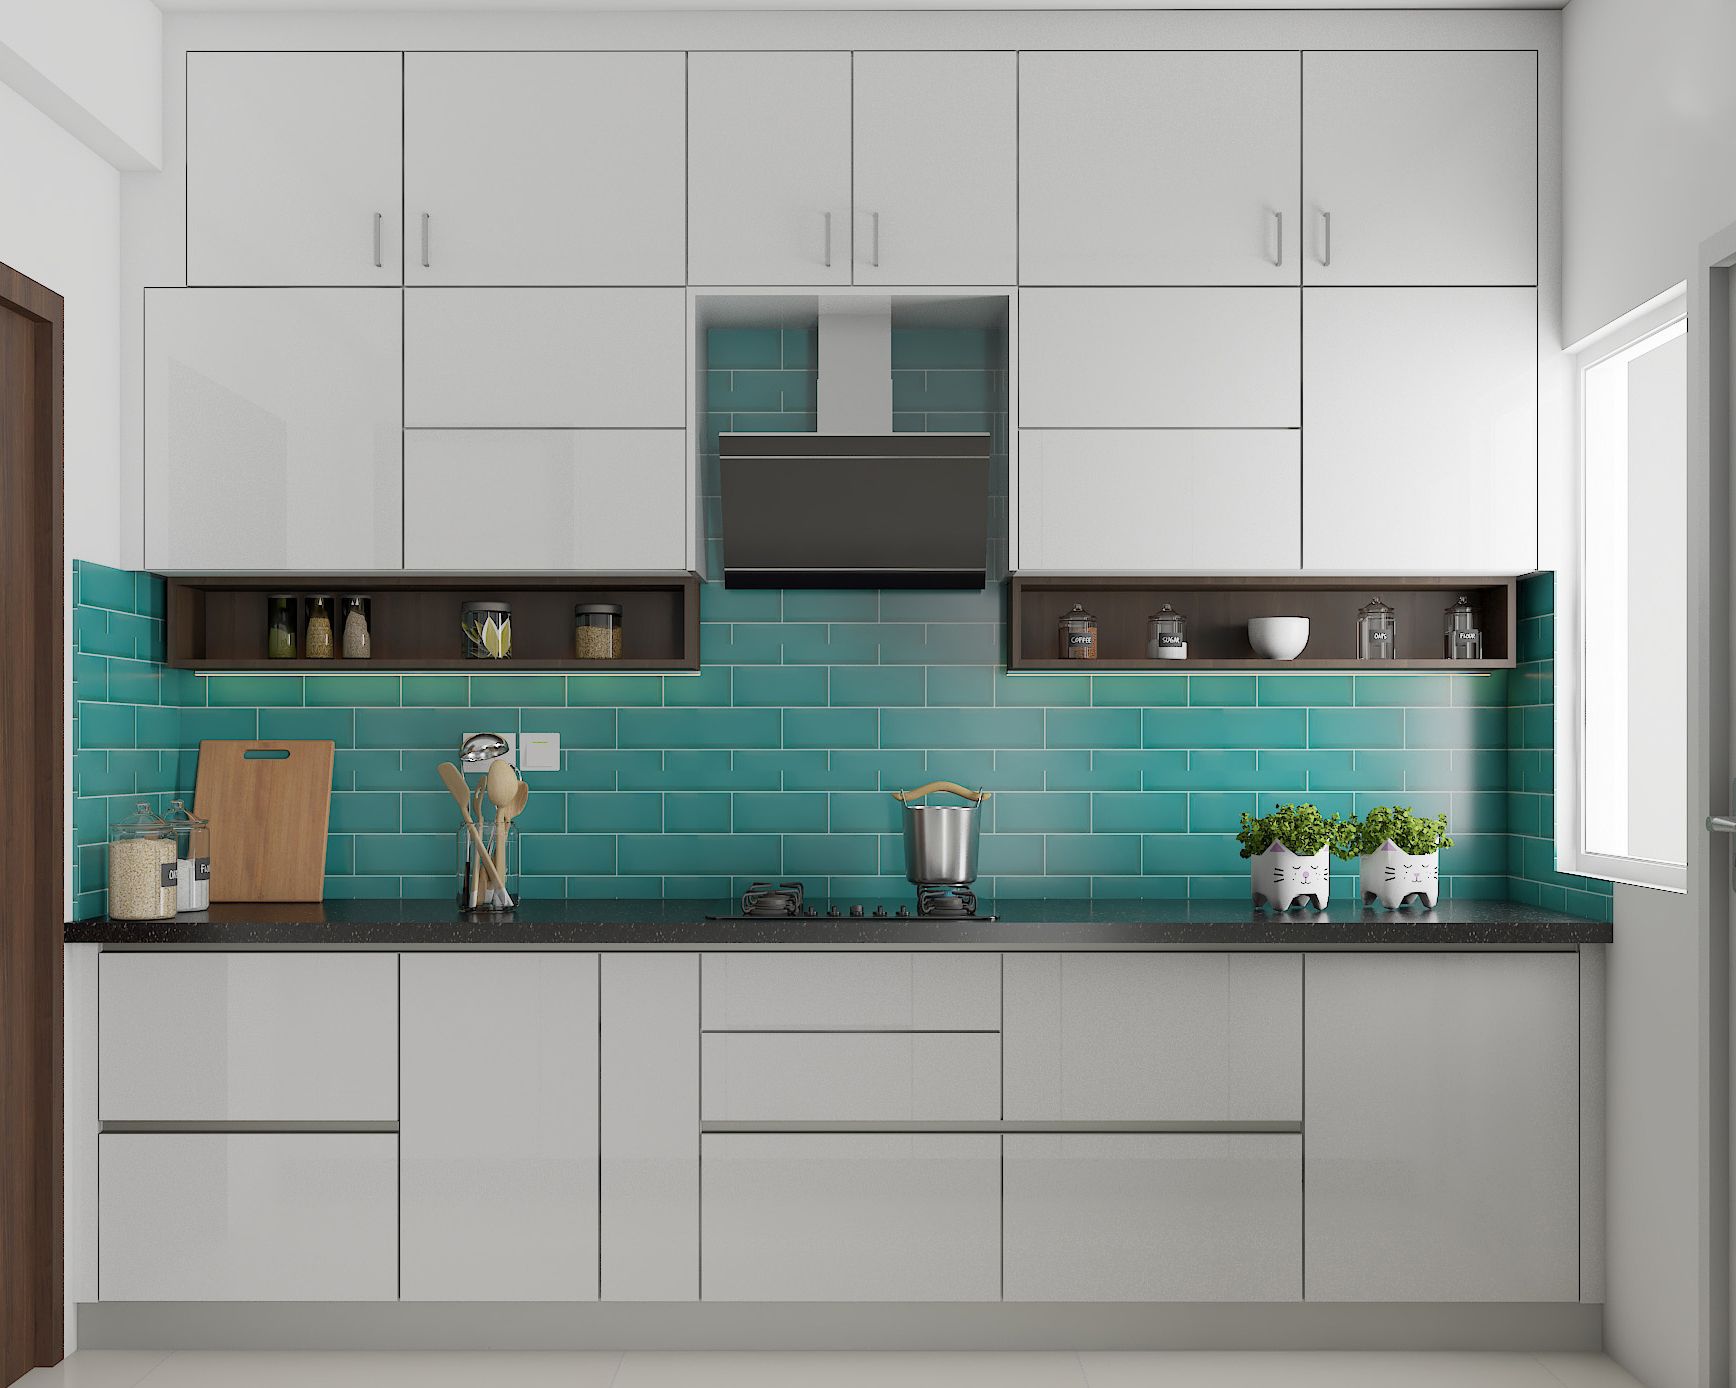 Contemporary White And Turquoise Parallel Kitchen Design With Subway Patterned Dado Tiles